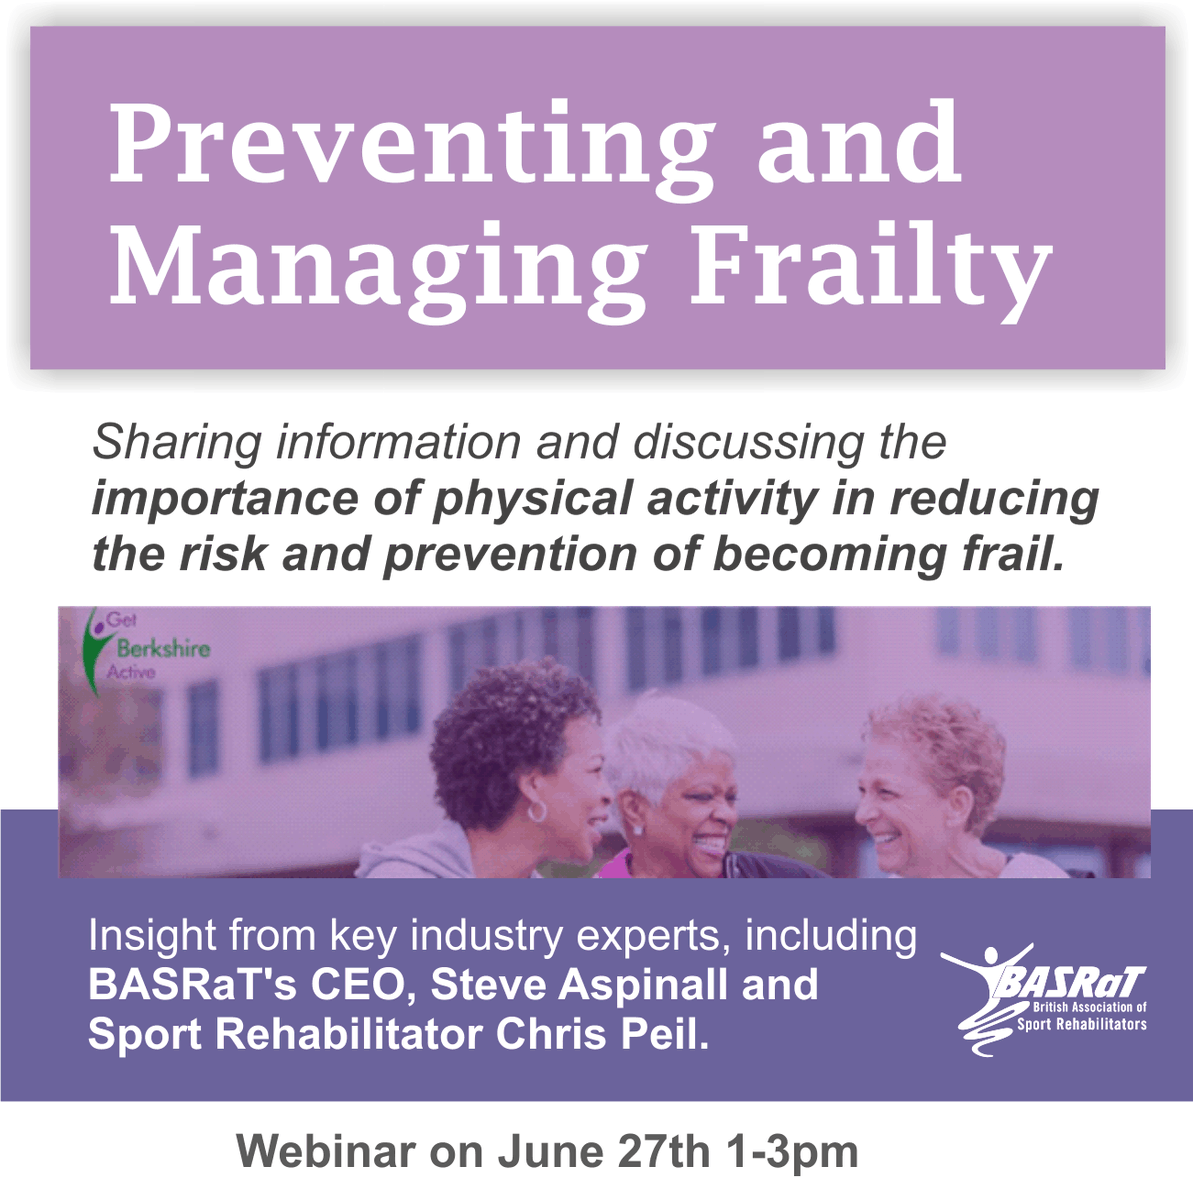 Reducing Frailty Webinar sharing info and discussing the importance of physical activity in reducing the risk and prevention of becoming frail Insight from key industry experts, including BASRaT's CEO, Steve Aspinall and Sport Rehabilitator, Chris Peil events.teams.microsoft.com/event/68db038e…